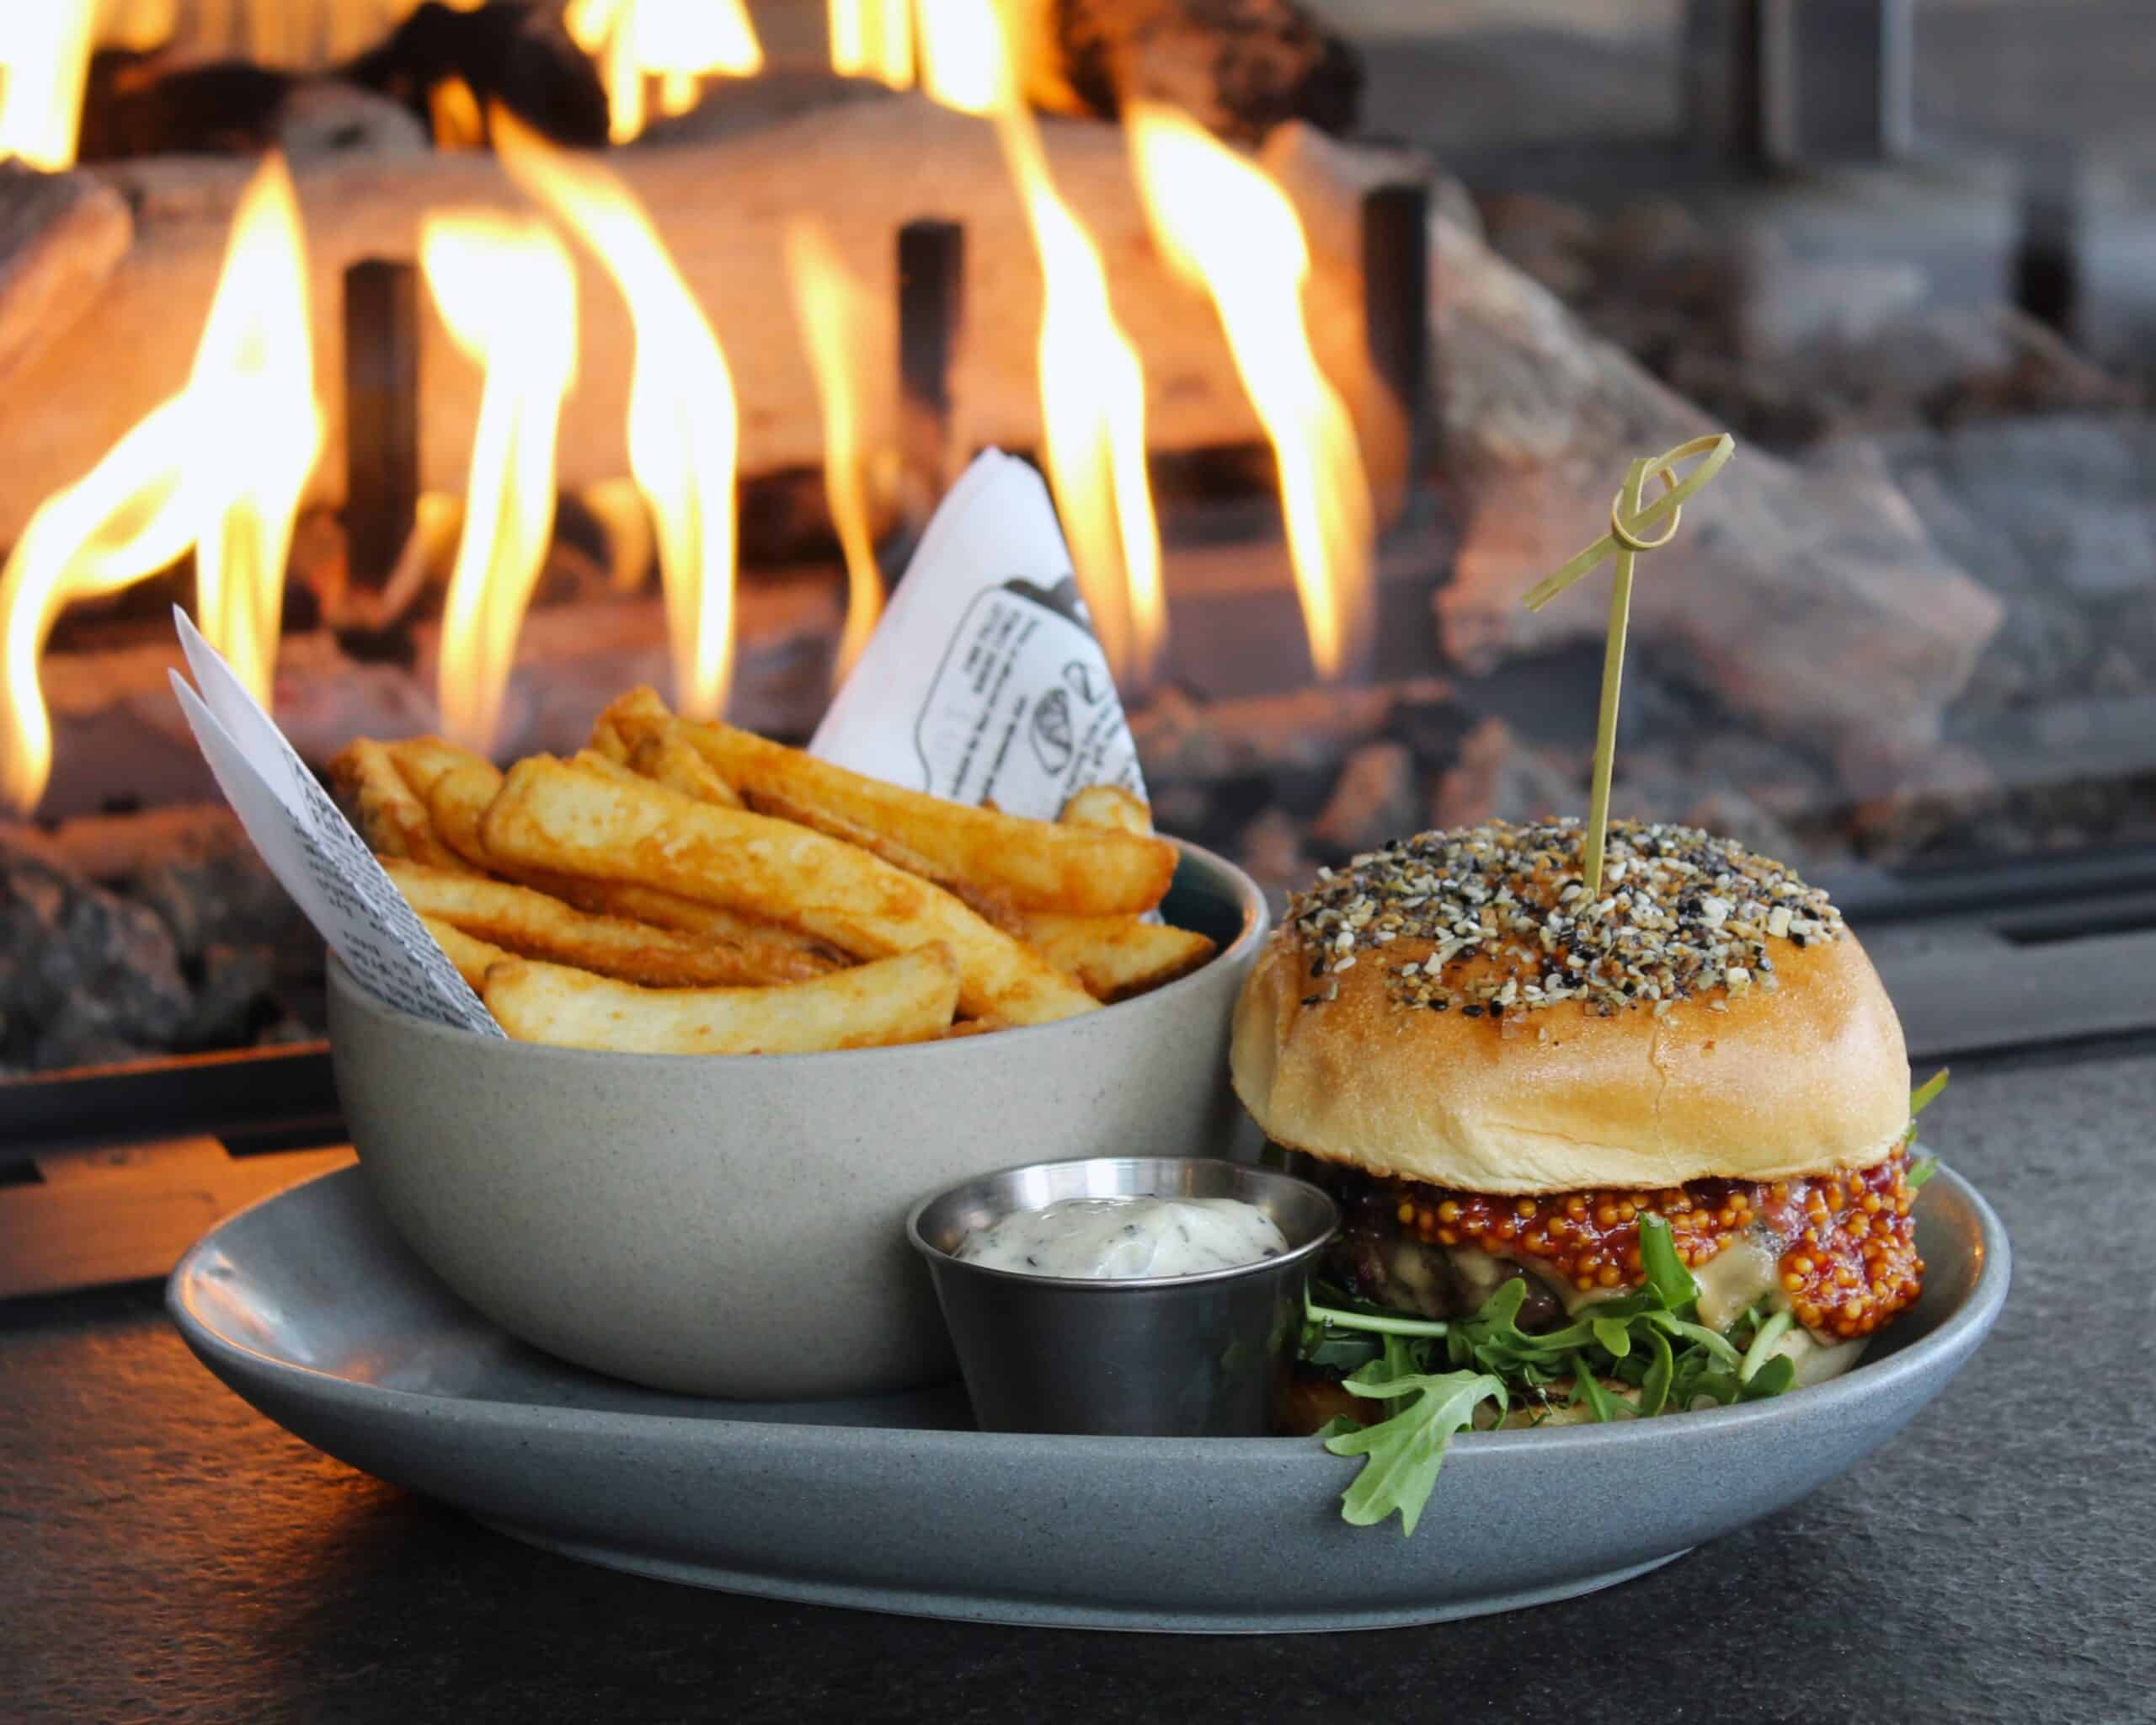 burger and fries next to the fireplace